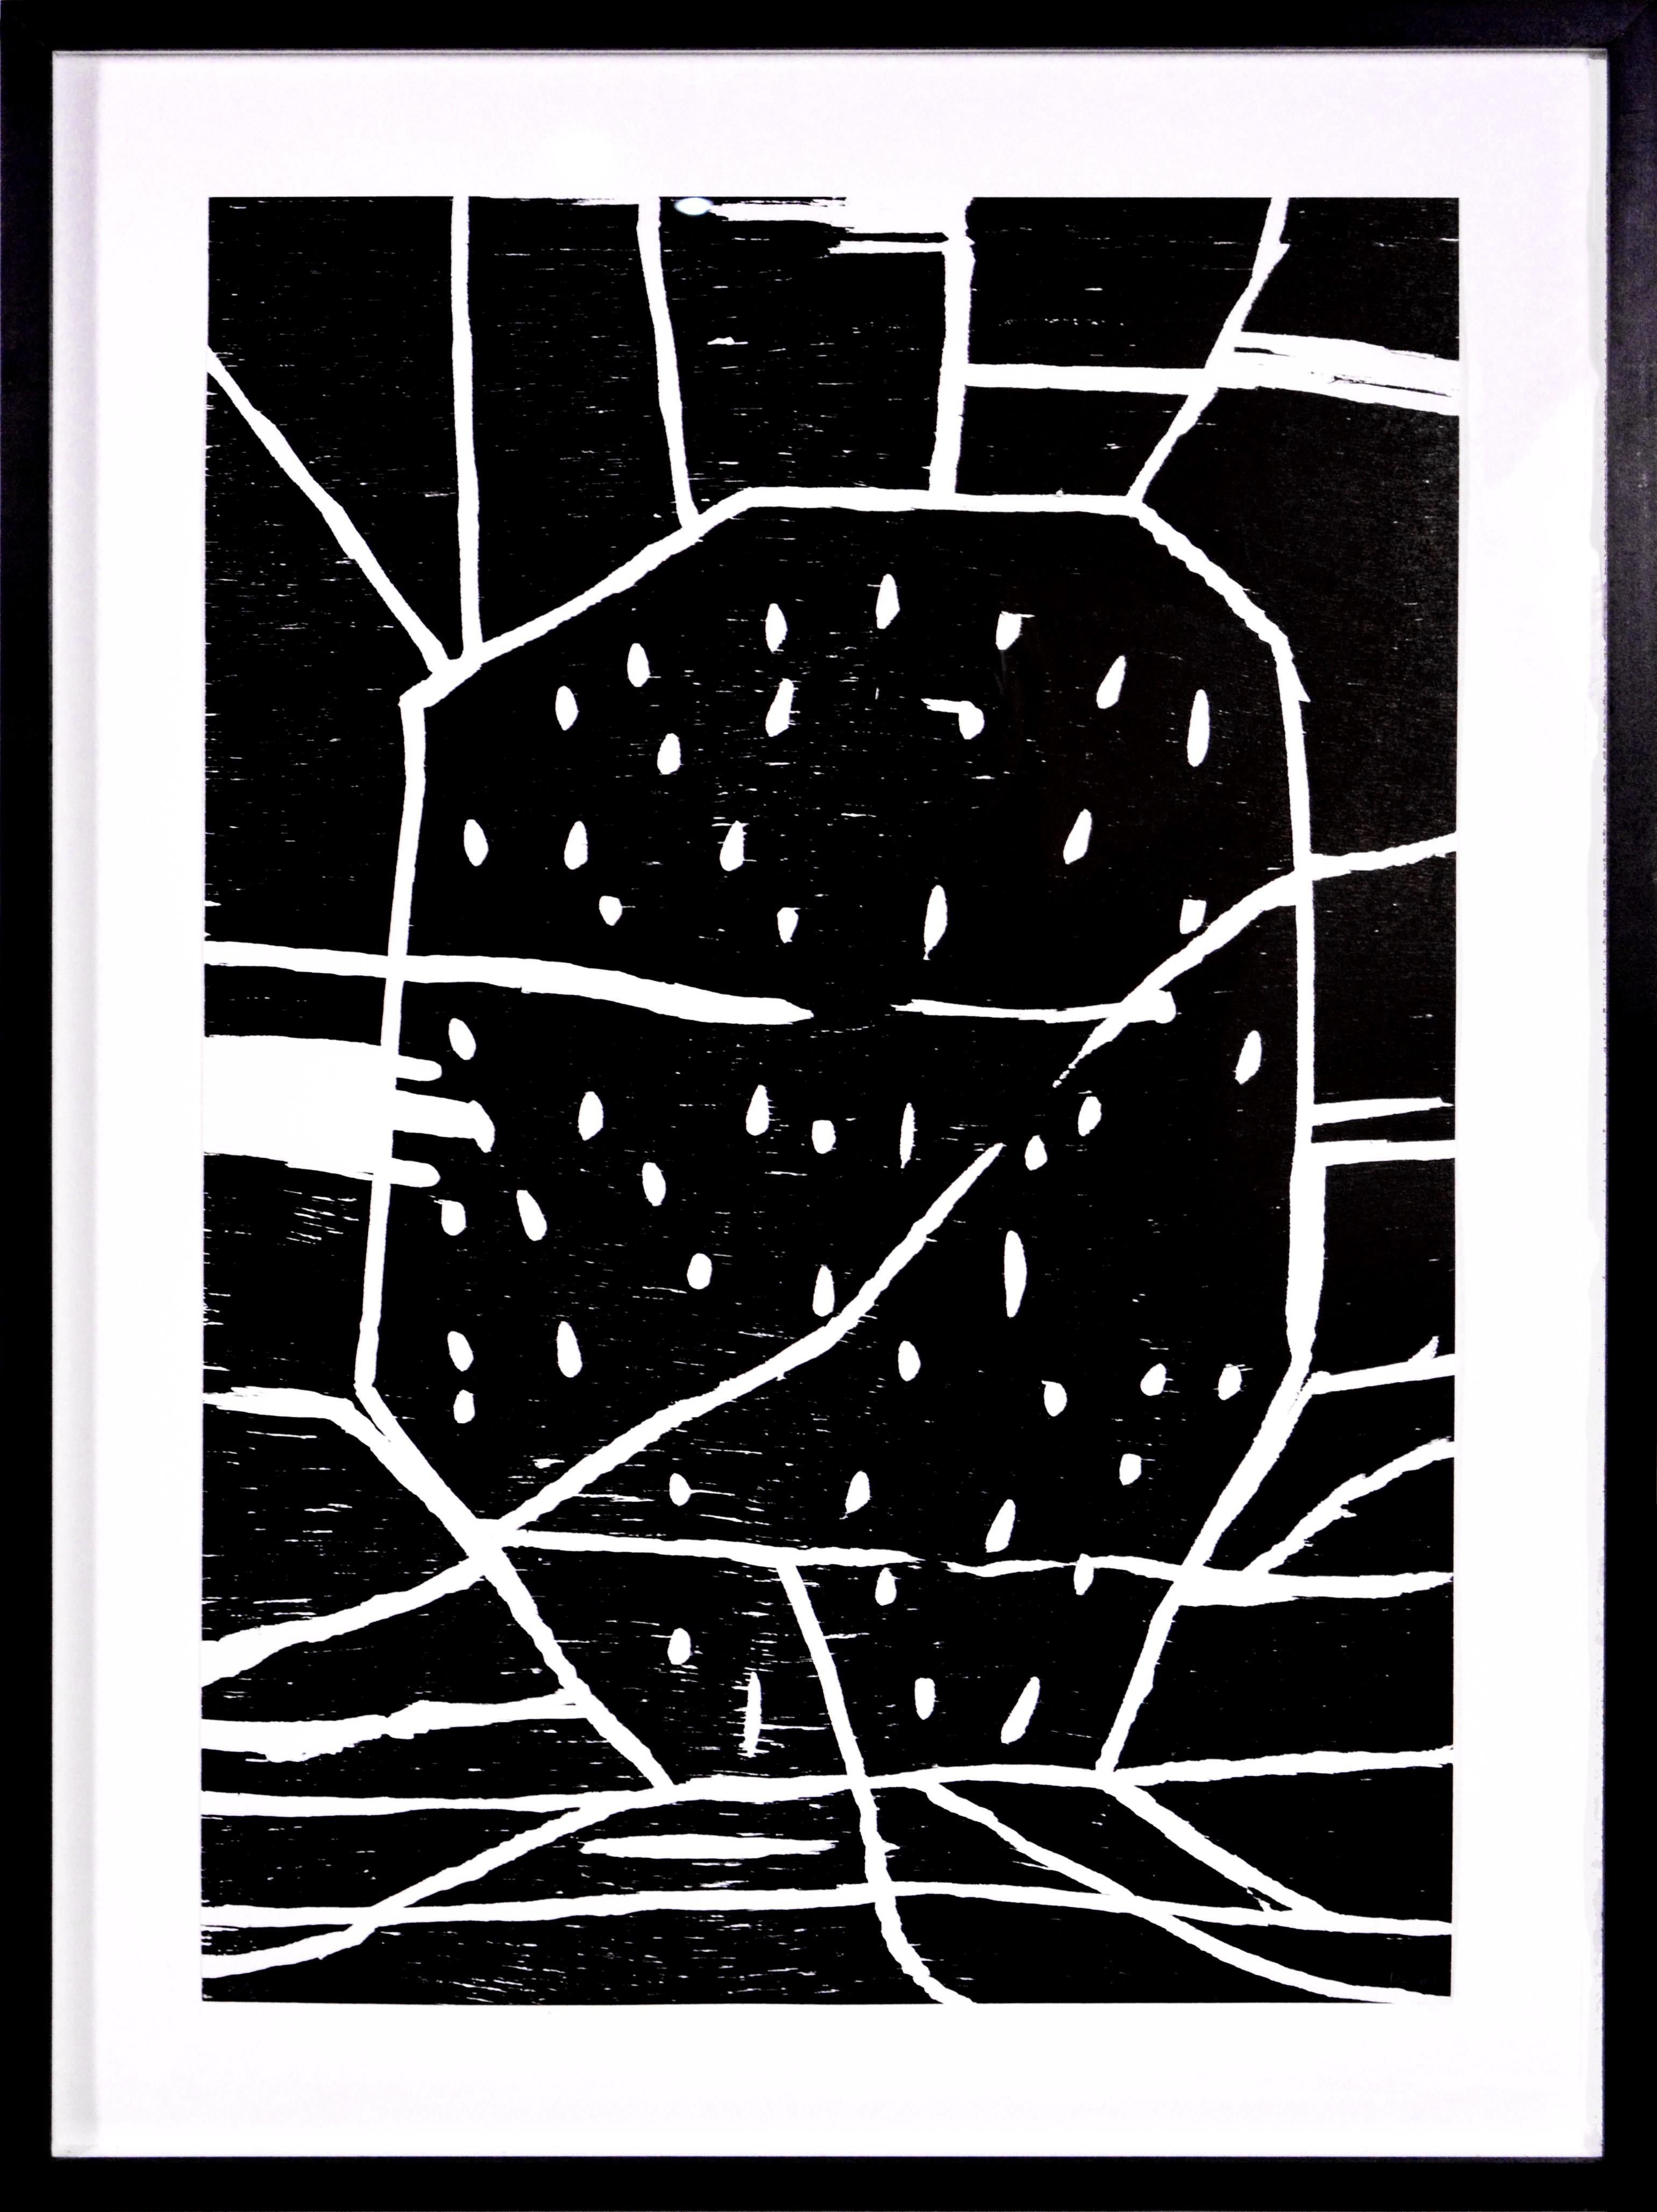 Structure with Dots - Black Still-Life Print by David Shrigley